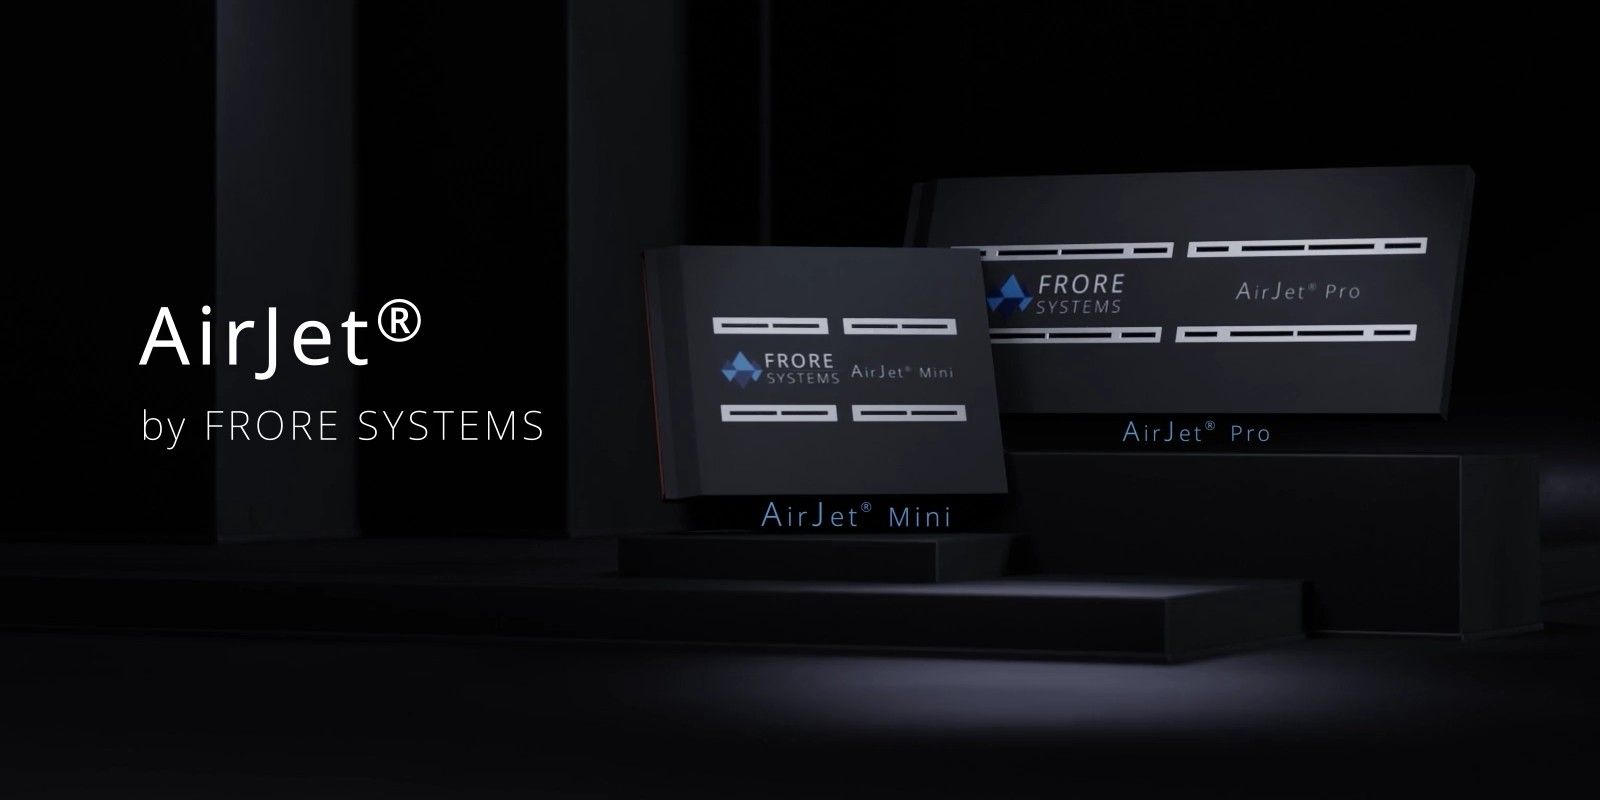 A photo showing the AirJet Mini and AirJet Pro cooling solutions